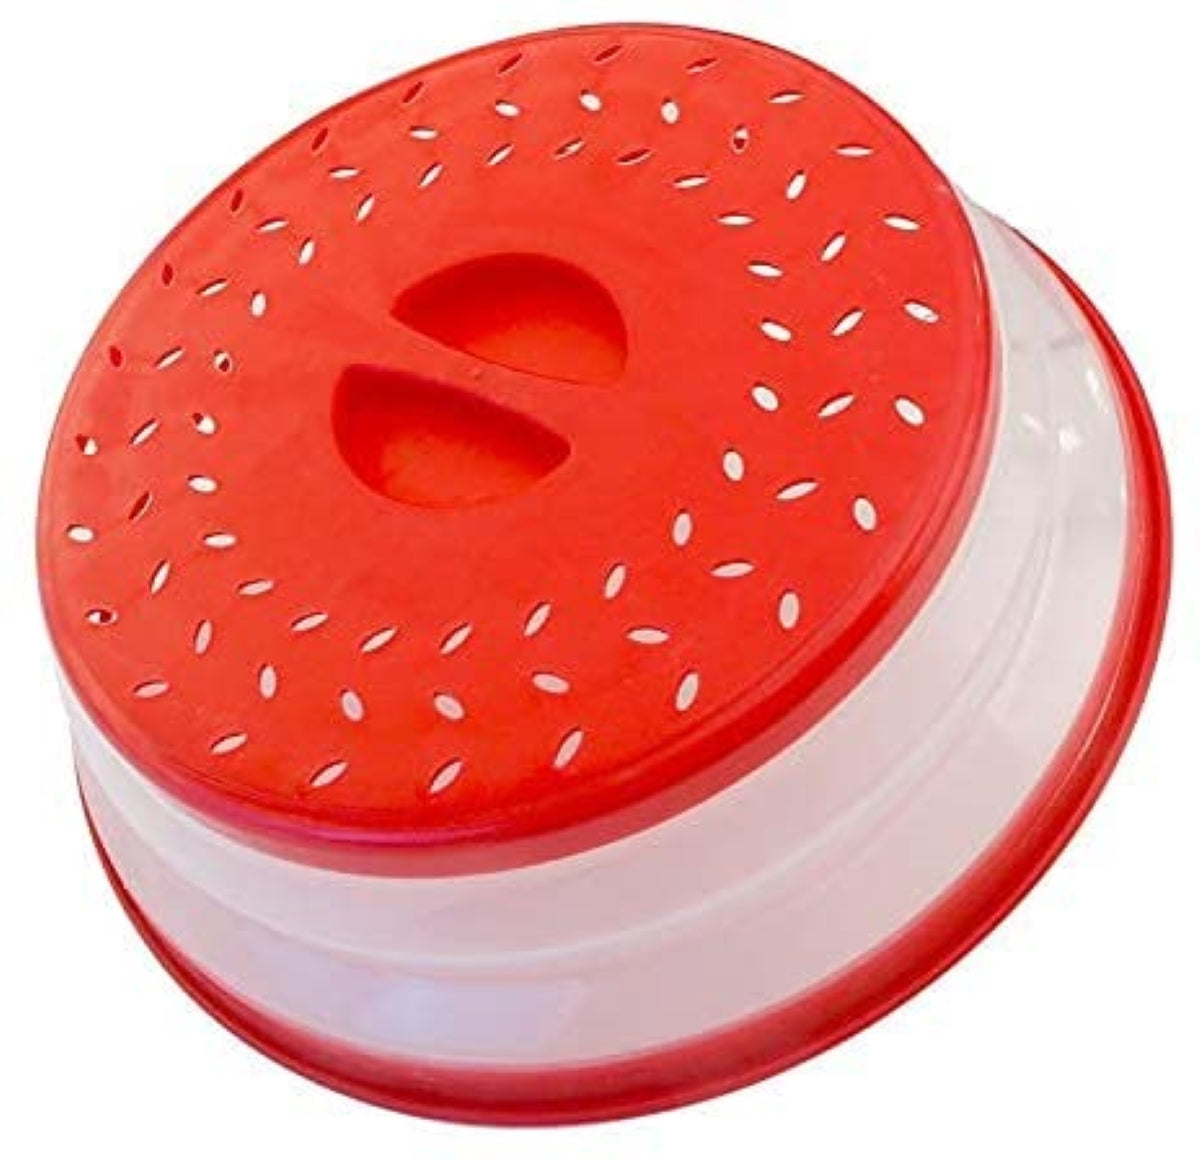 With foldable microwave splash cover, can be used in dishwasher, microwave  cover with steam hole 